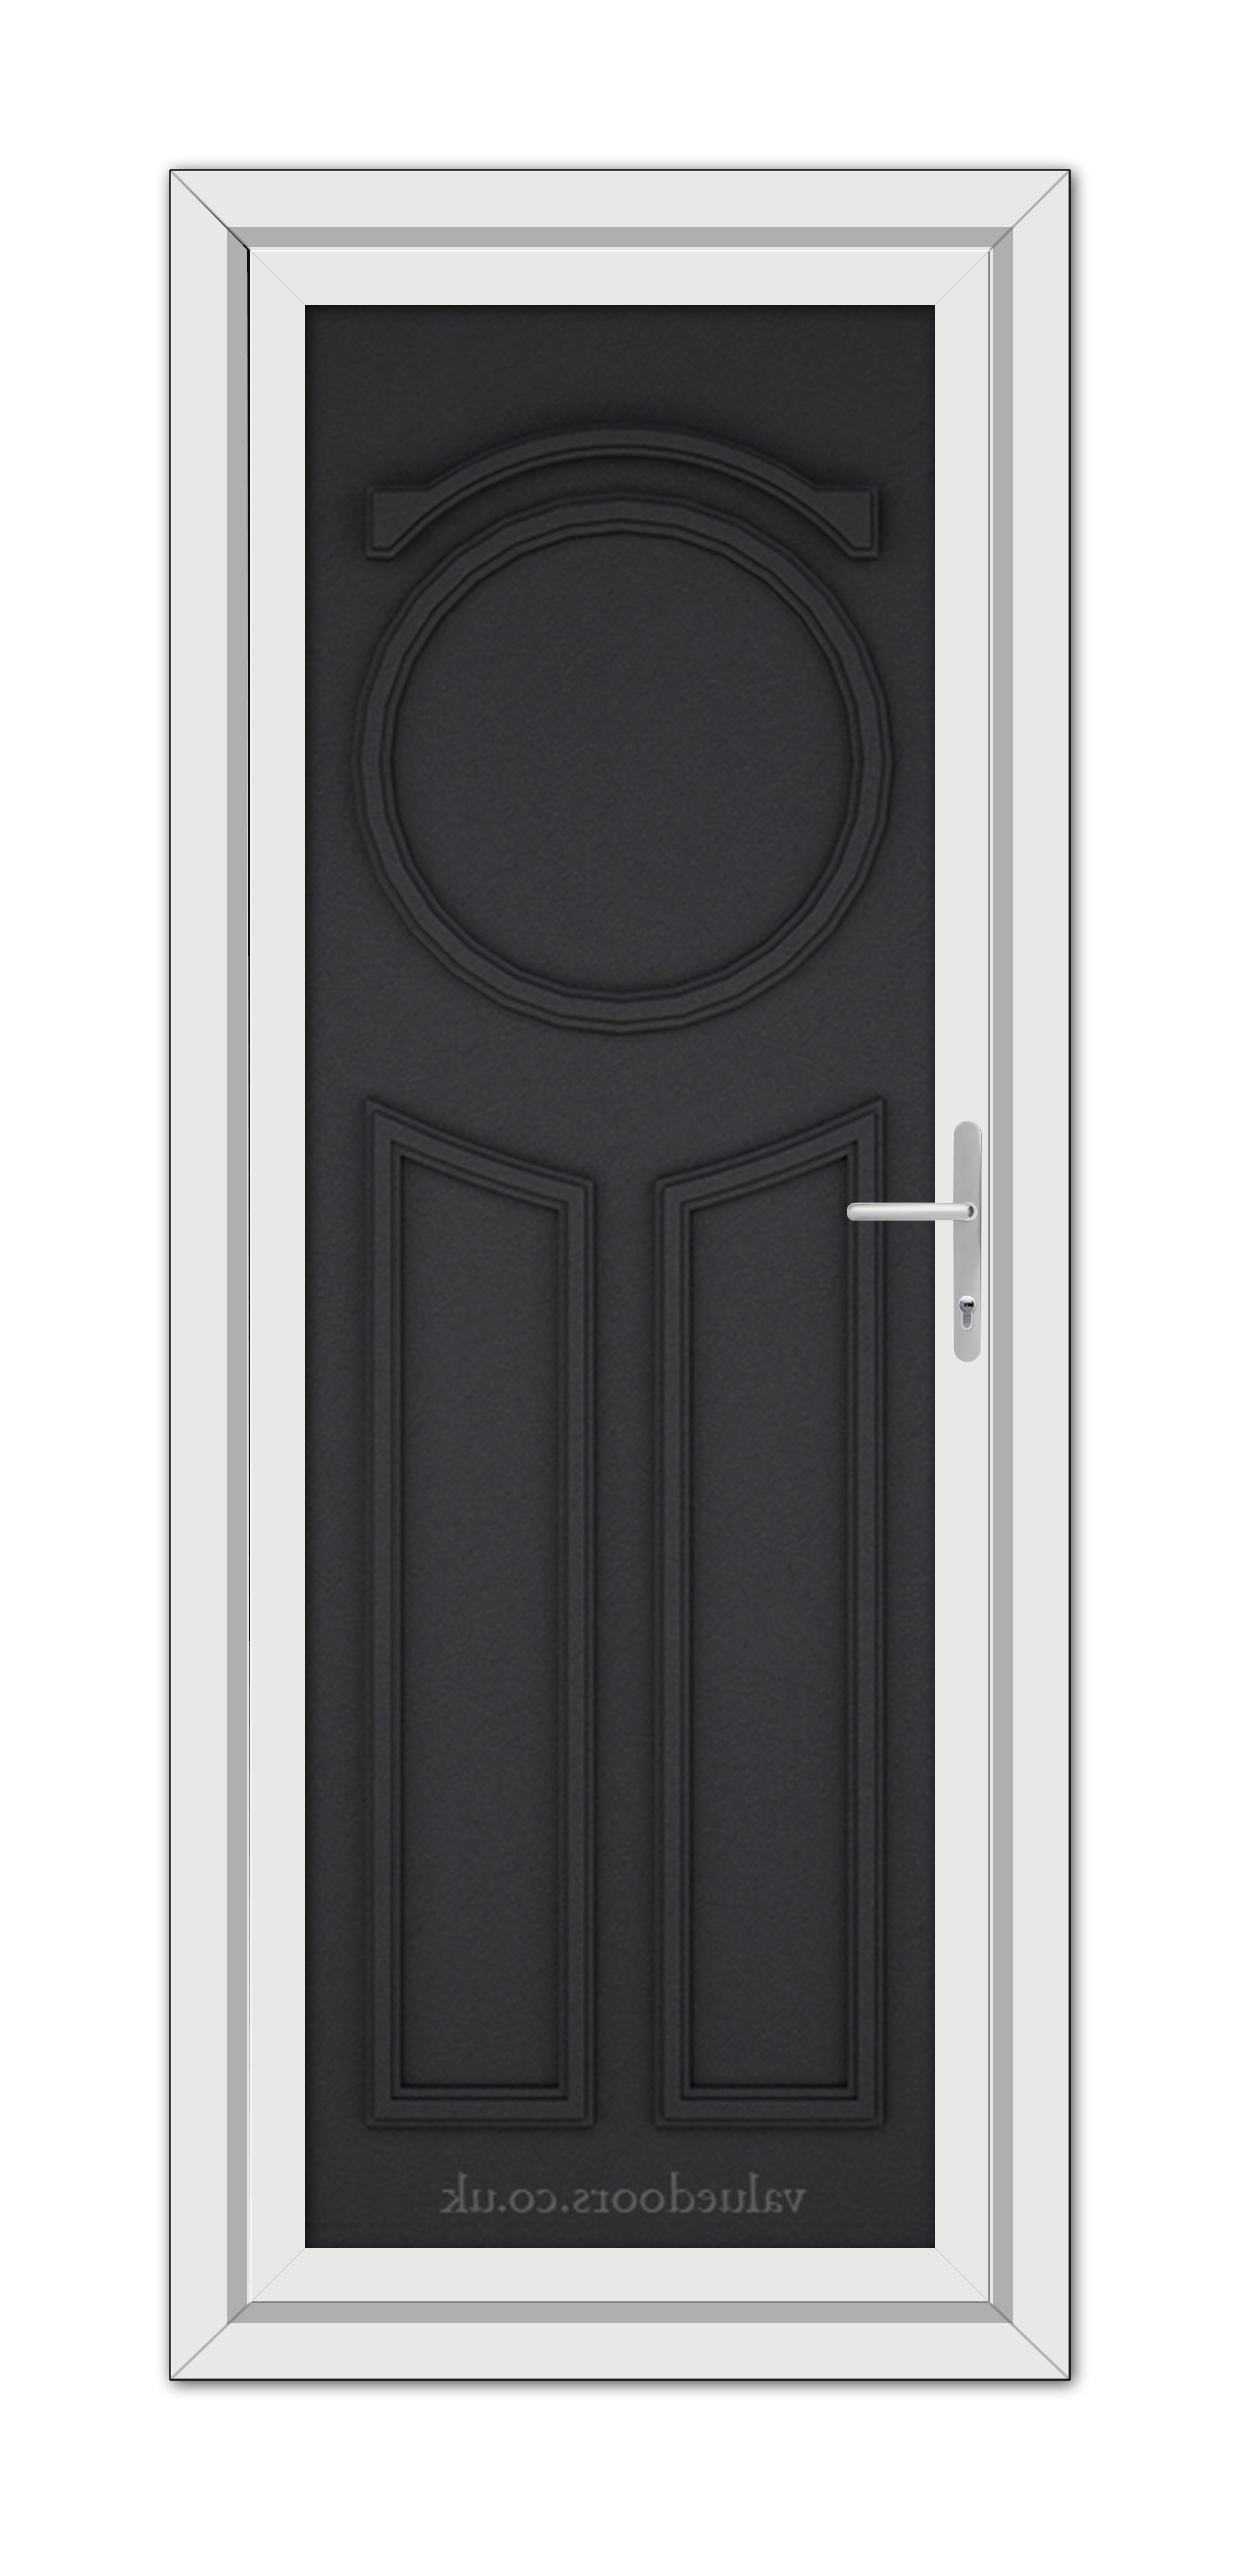 A modern Black Brown Blenheim Solid uPVC Door with a circular window at the top and two rectangular panels below, set within a white frame, viewed from the front.